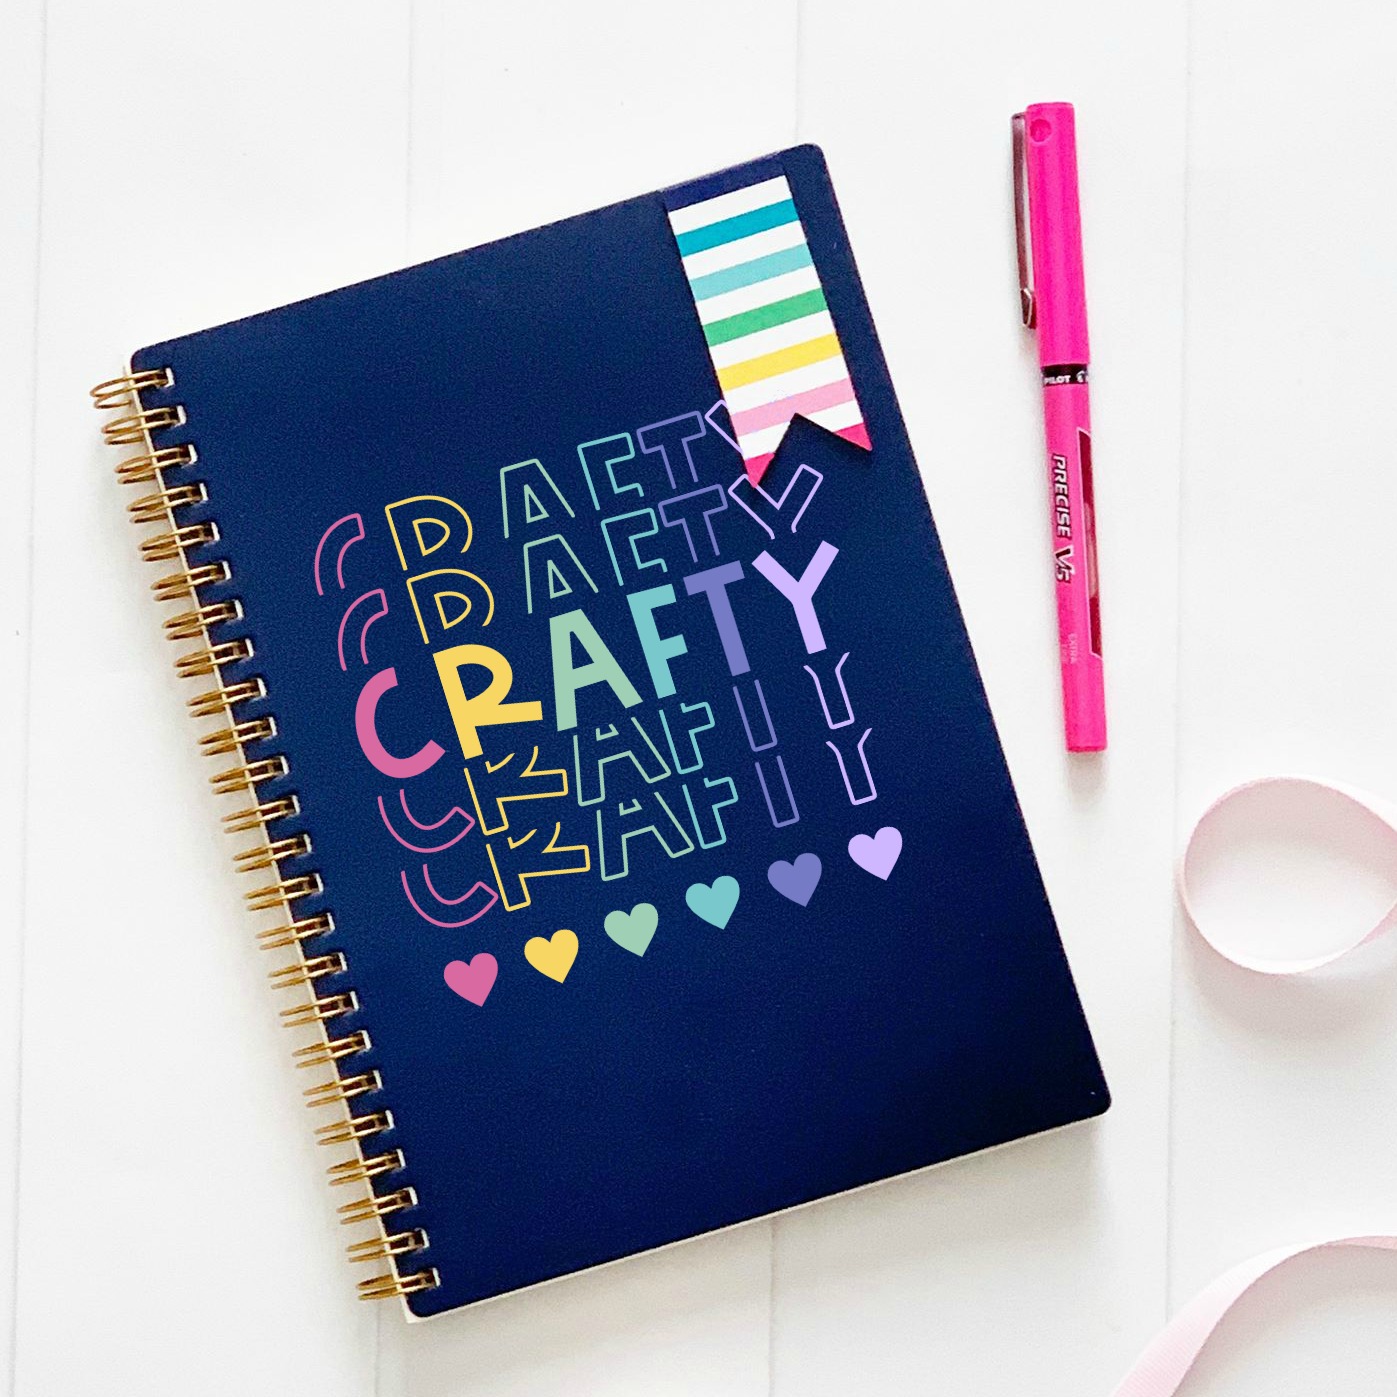 13 Free Craft SVG Files- Our Gift To You! - Hello Creative Family